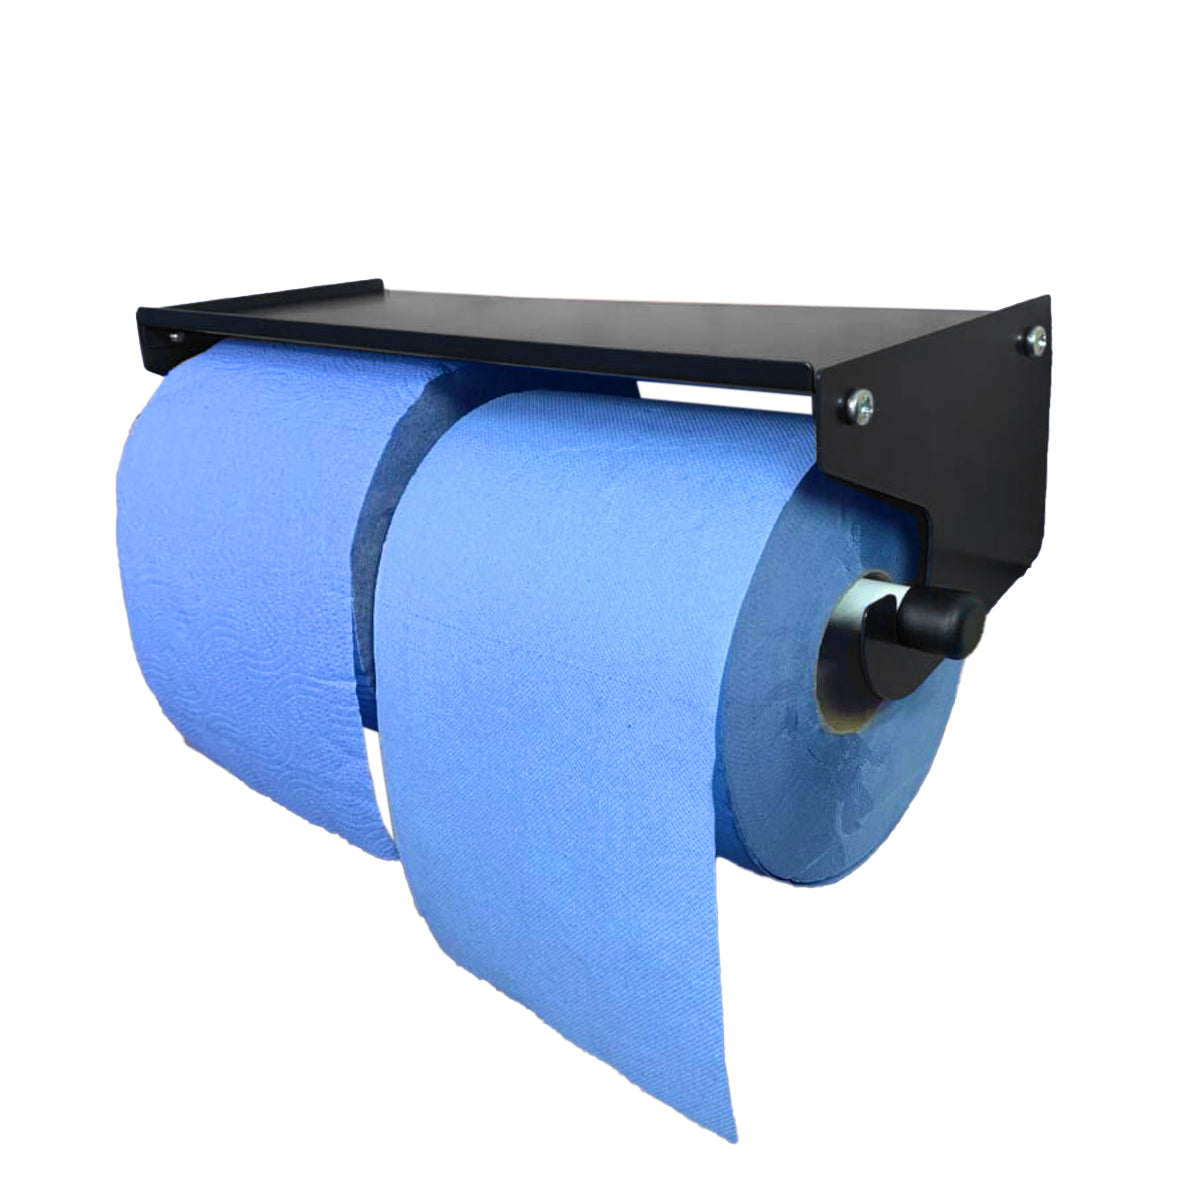 MegaMaxx UK™ Dual Blue Roll & Paper Towel Holder with Shelf | Indoor Outdoors